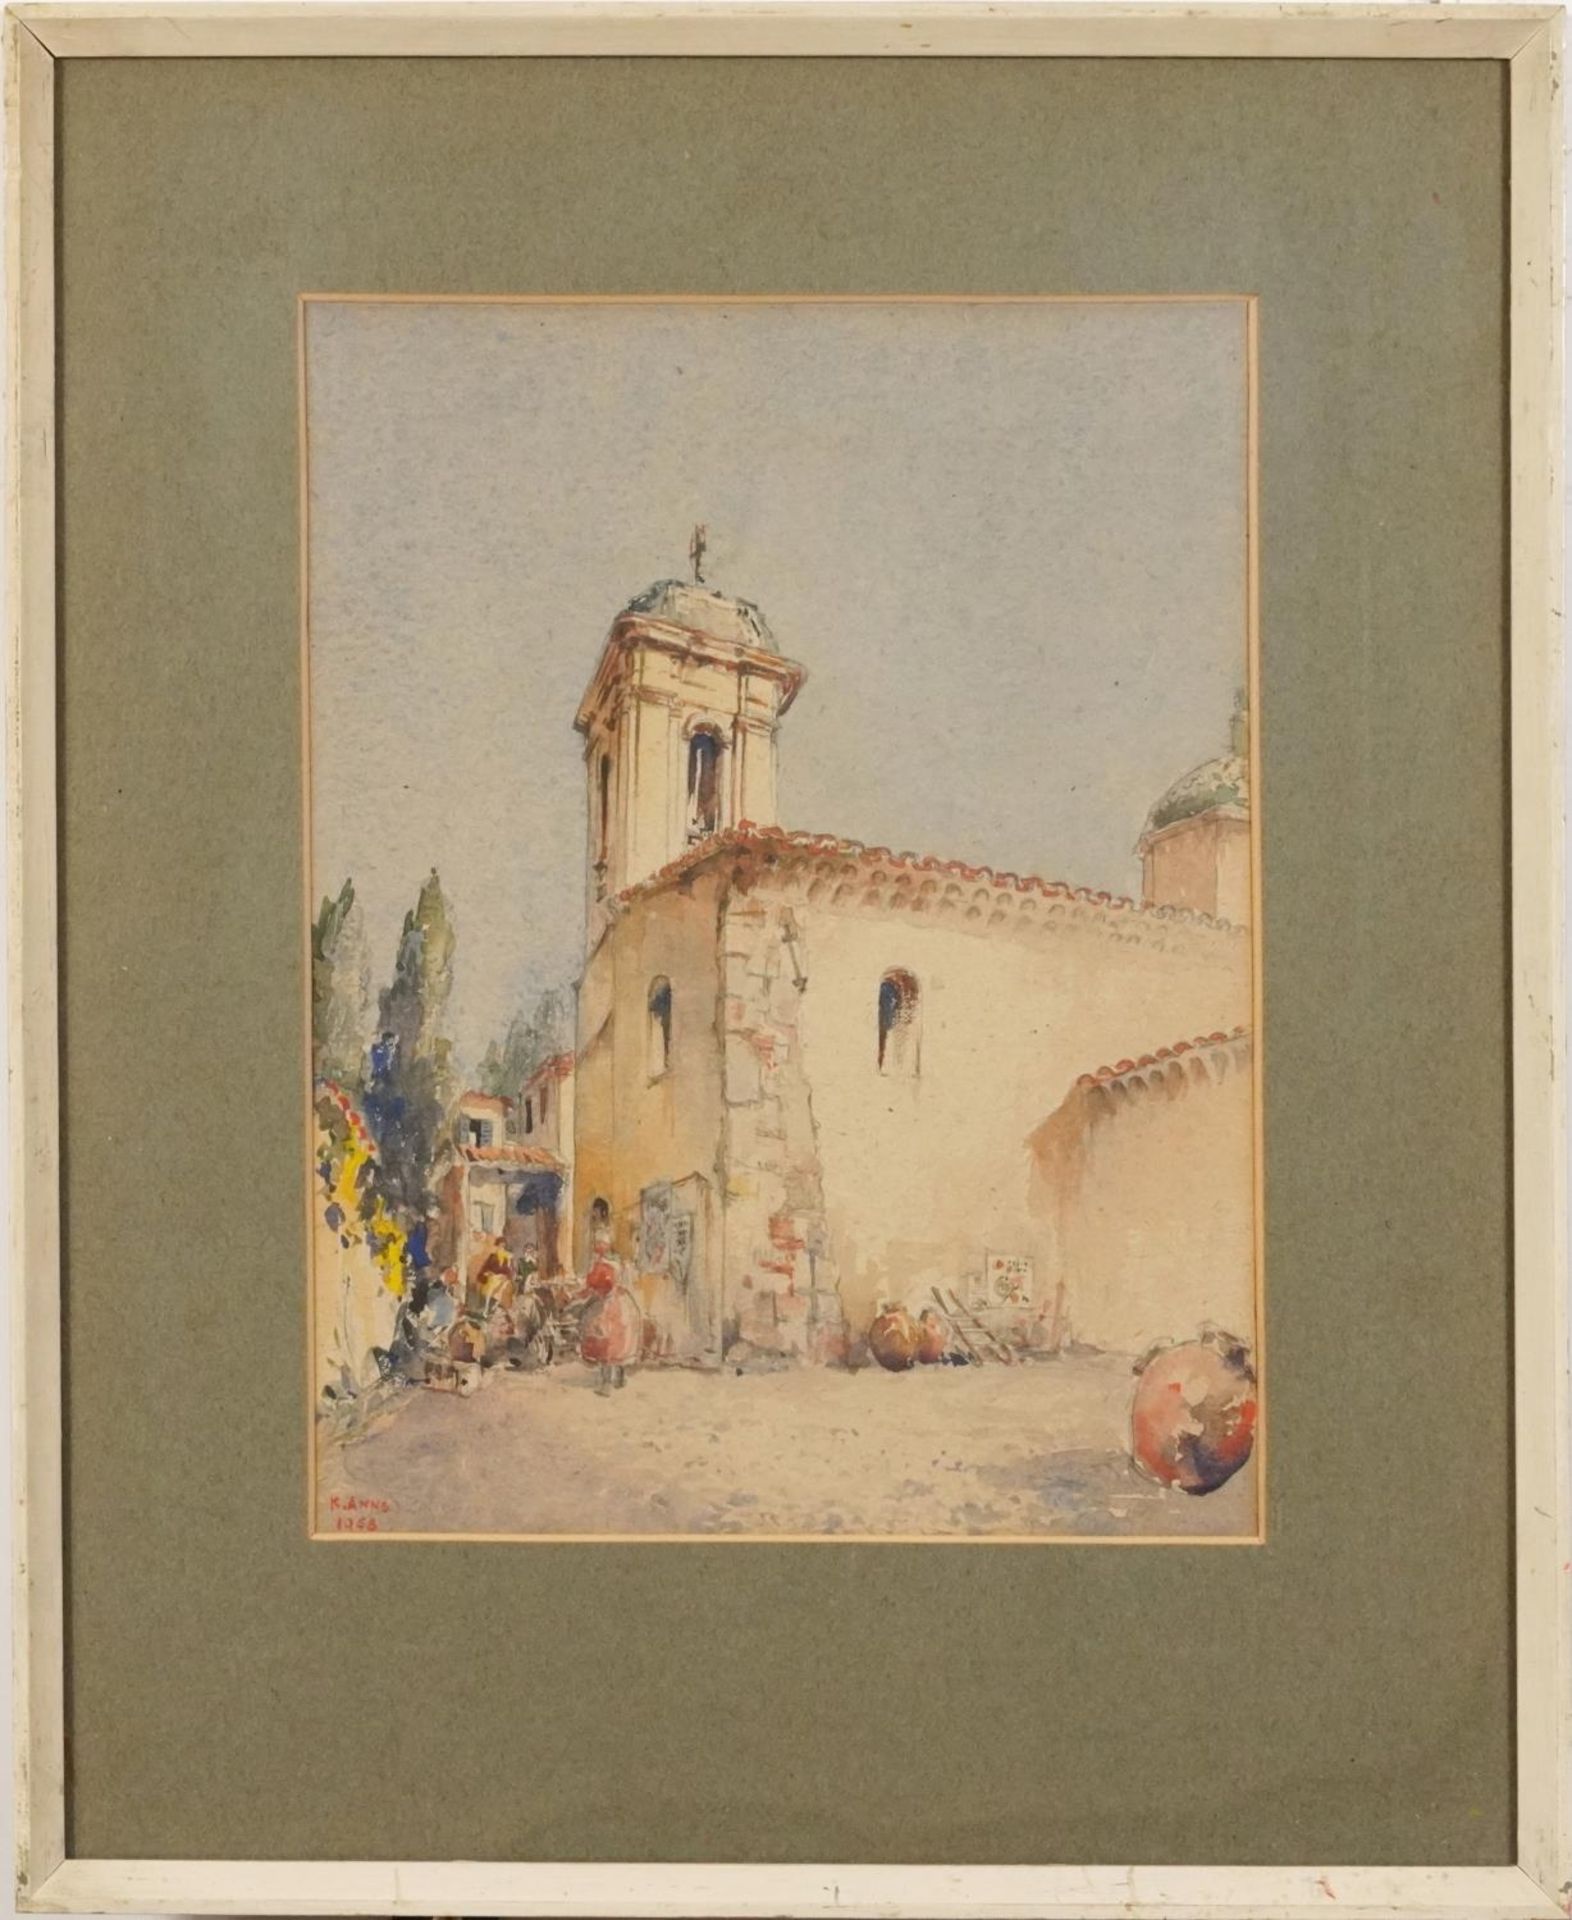 Kenneth Anns 1953 - Figures before a tower, mid 20th century watercolour, biography and various - Image 3 of 12